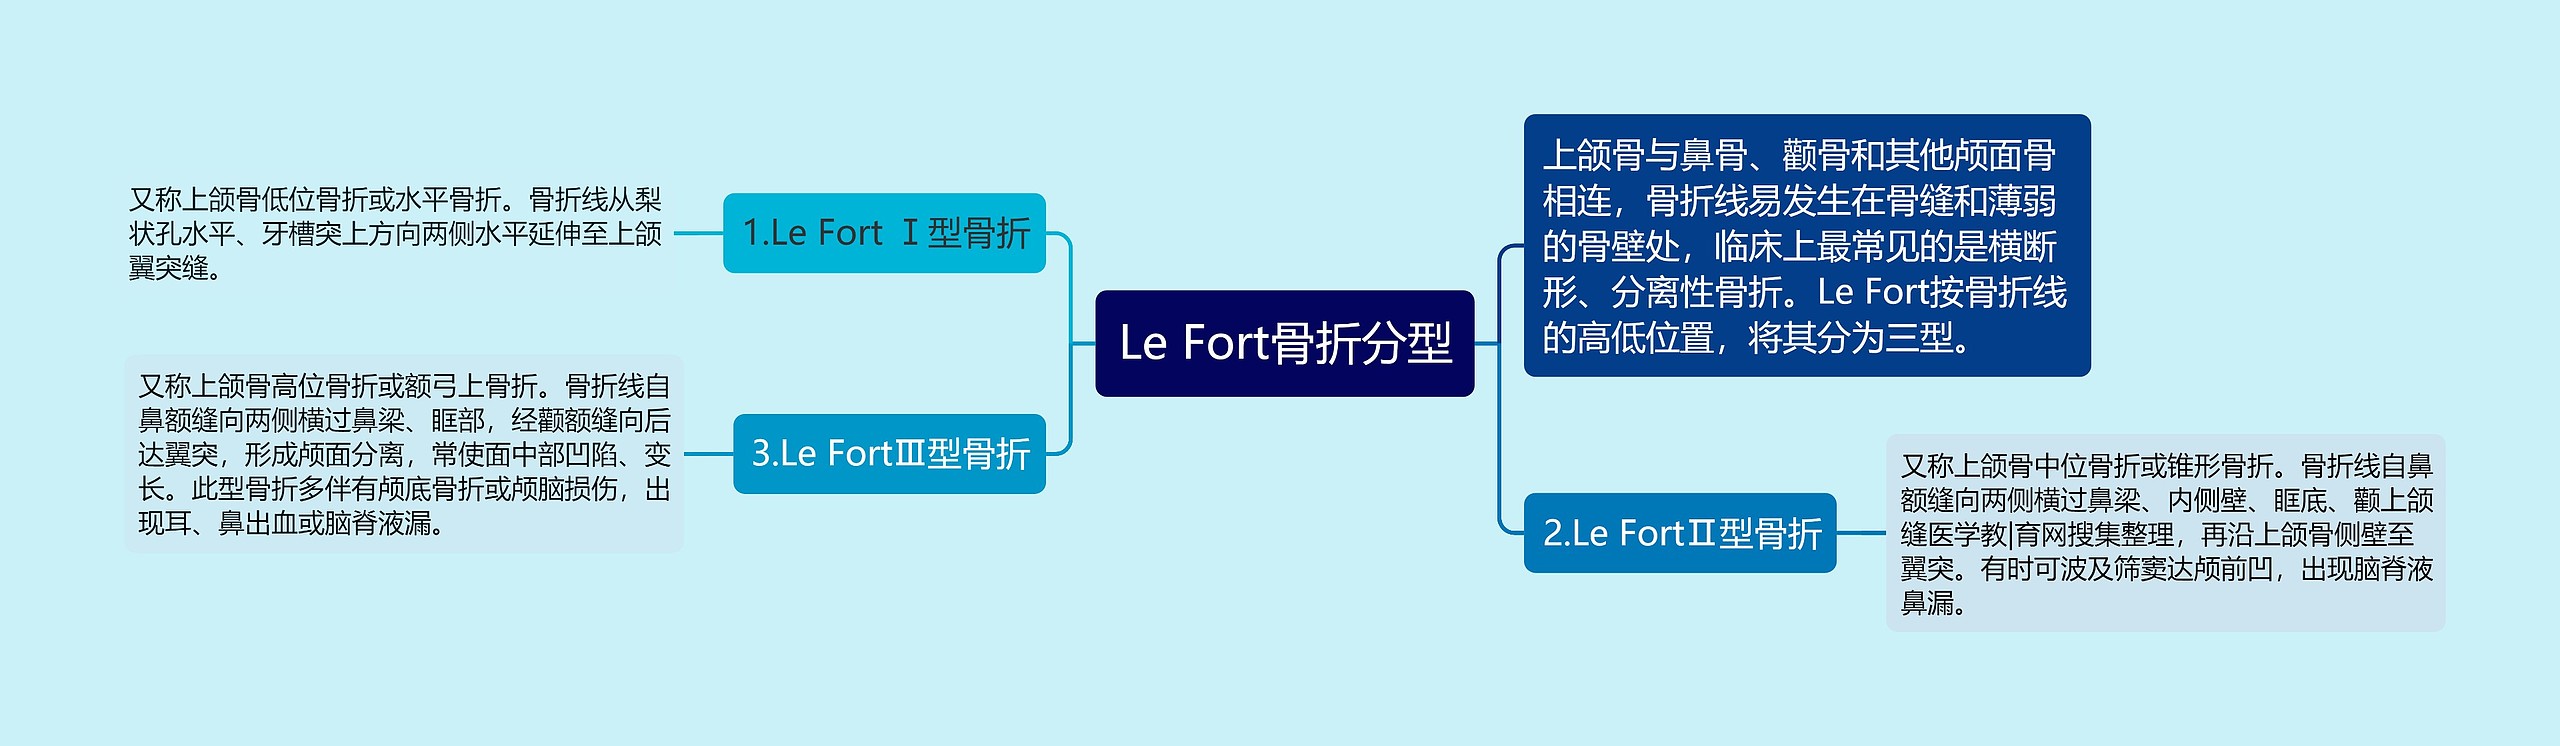 Le Fort骨折分型思维导图